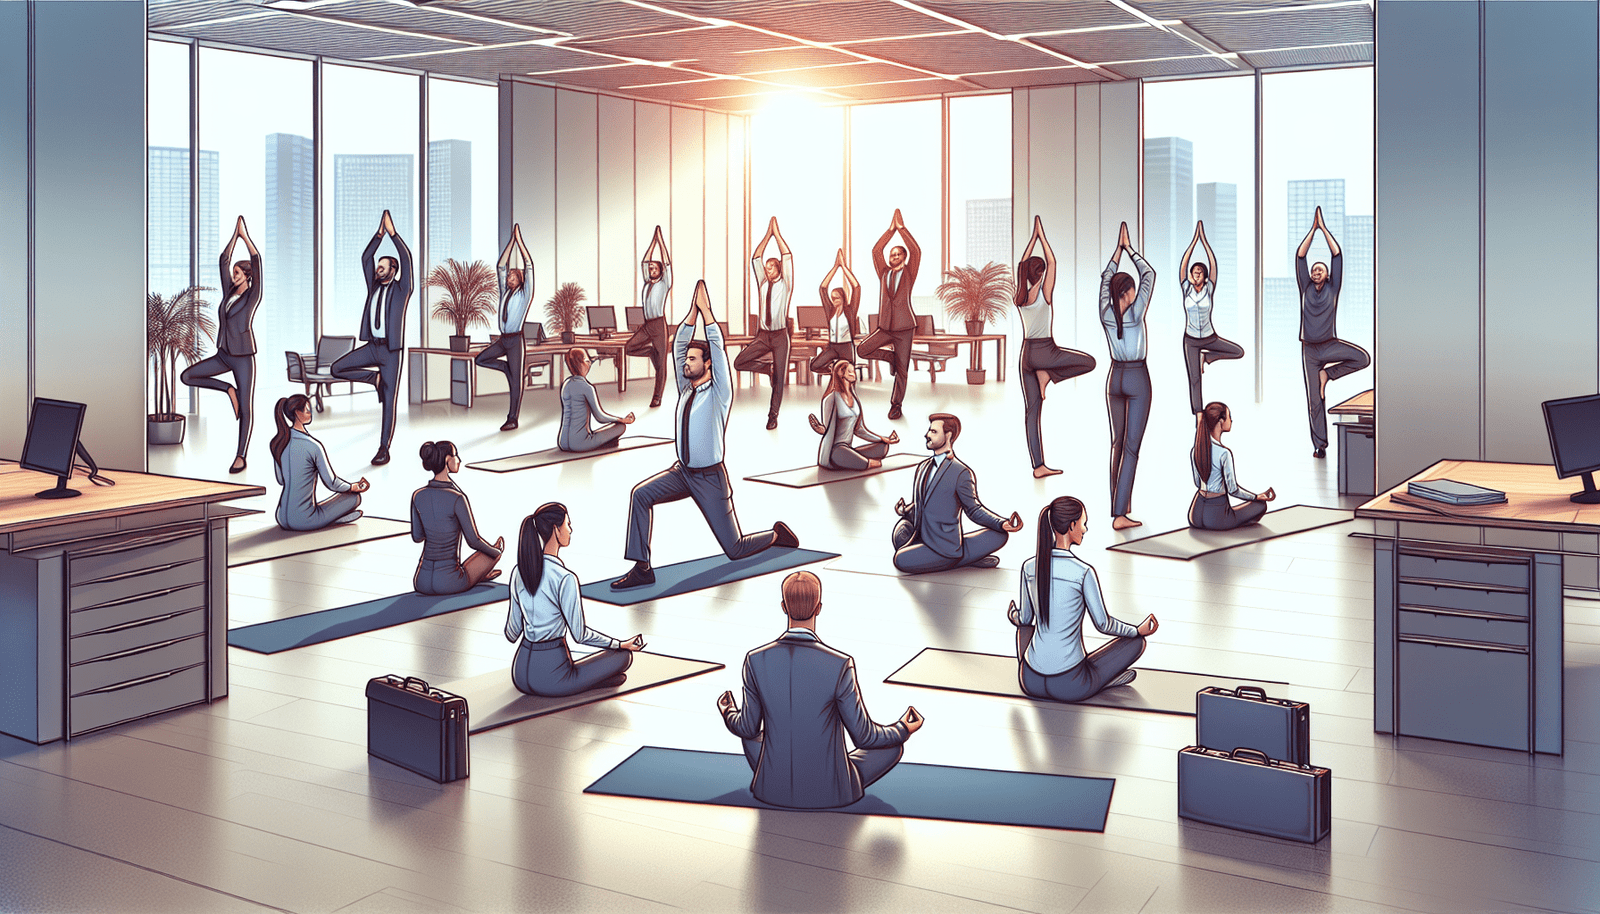 How Can Yoga Help With Managing Stress In The Workplace?